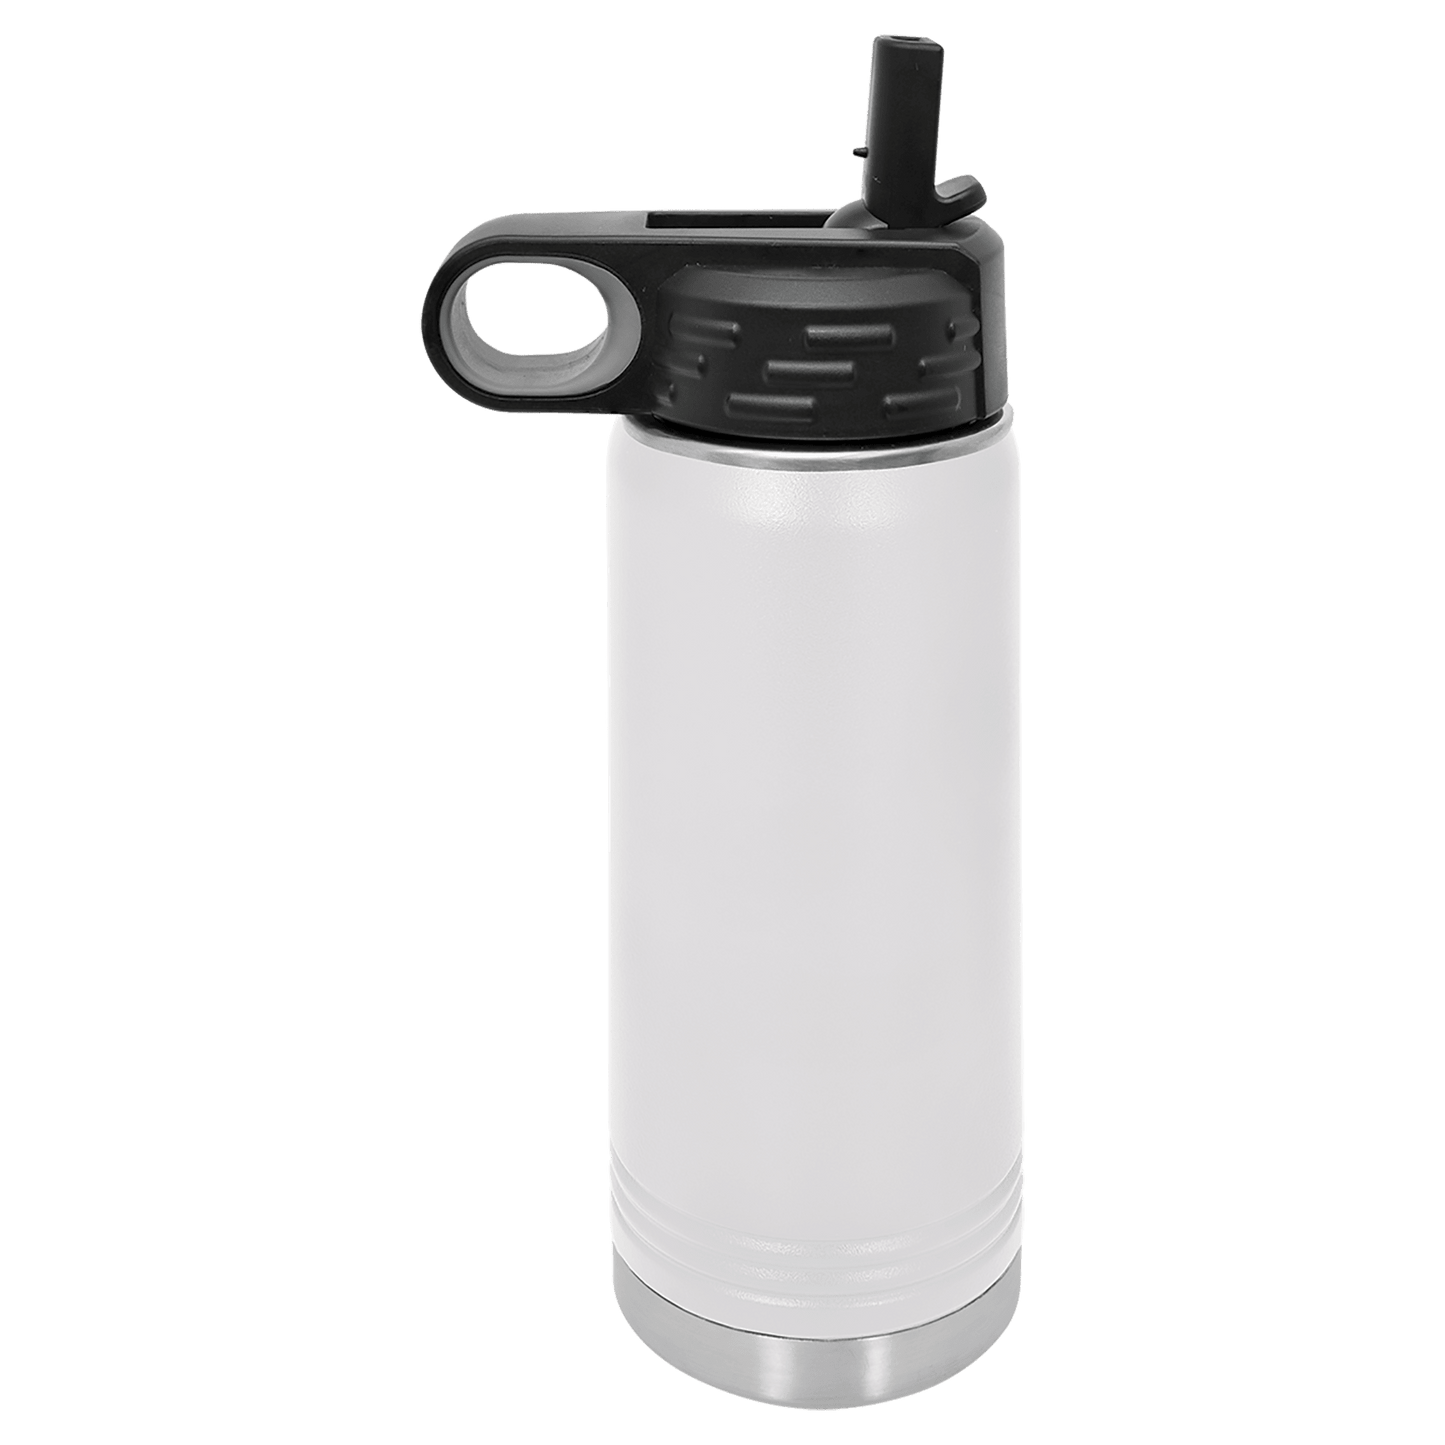 32 oz. Insulated Water Bottle.  QUANTITY DISCOUNTS AVAILABLE!